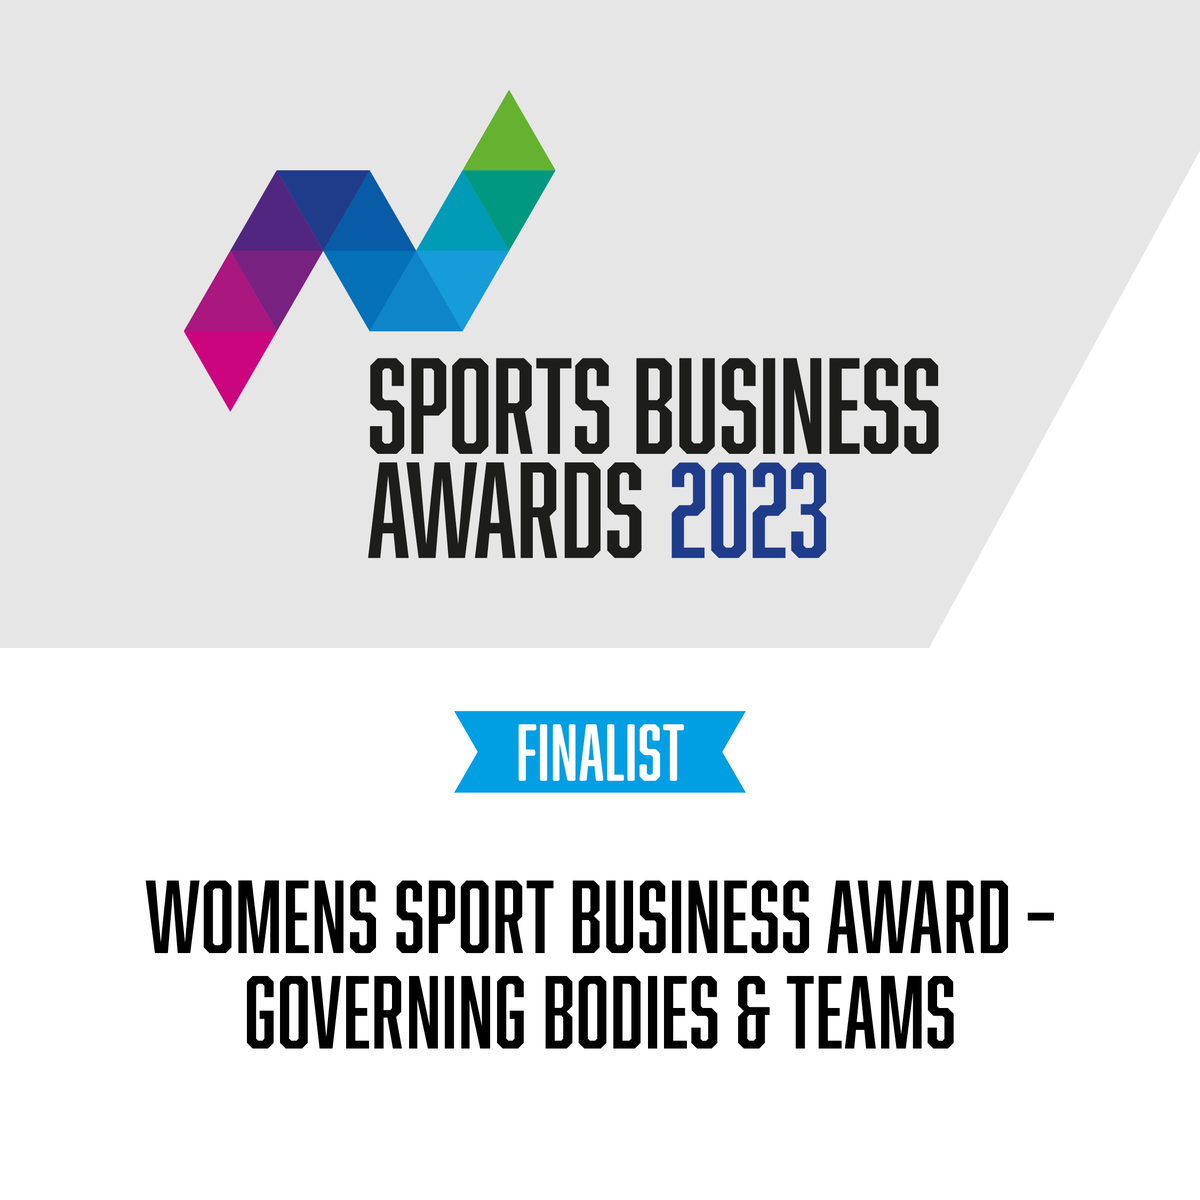 We’re absolutely thrilled to announce that we’ve been listed as a finalist for the #SBA23 Women’s Sport Business Award for Governing Bodies & Teams 🏆

Project Development Lead, @billieeidk said: 'It is truly a rewarding feeling to be considered for the Women's Sport Business…